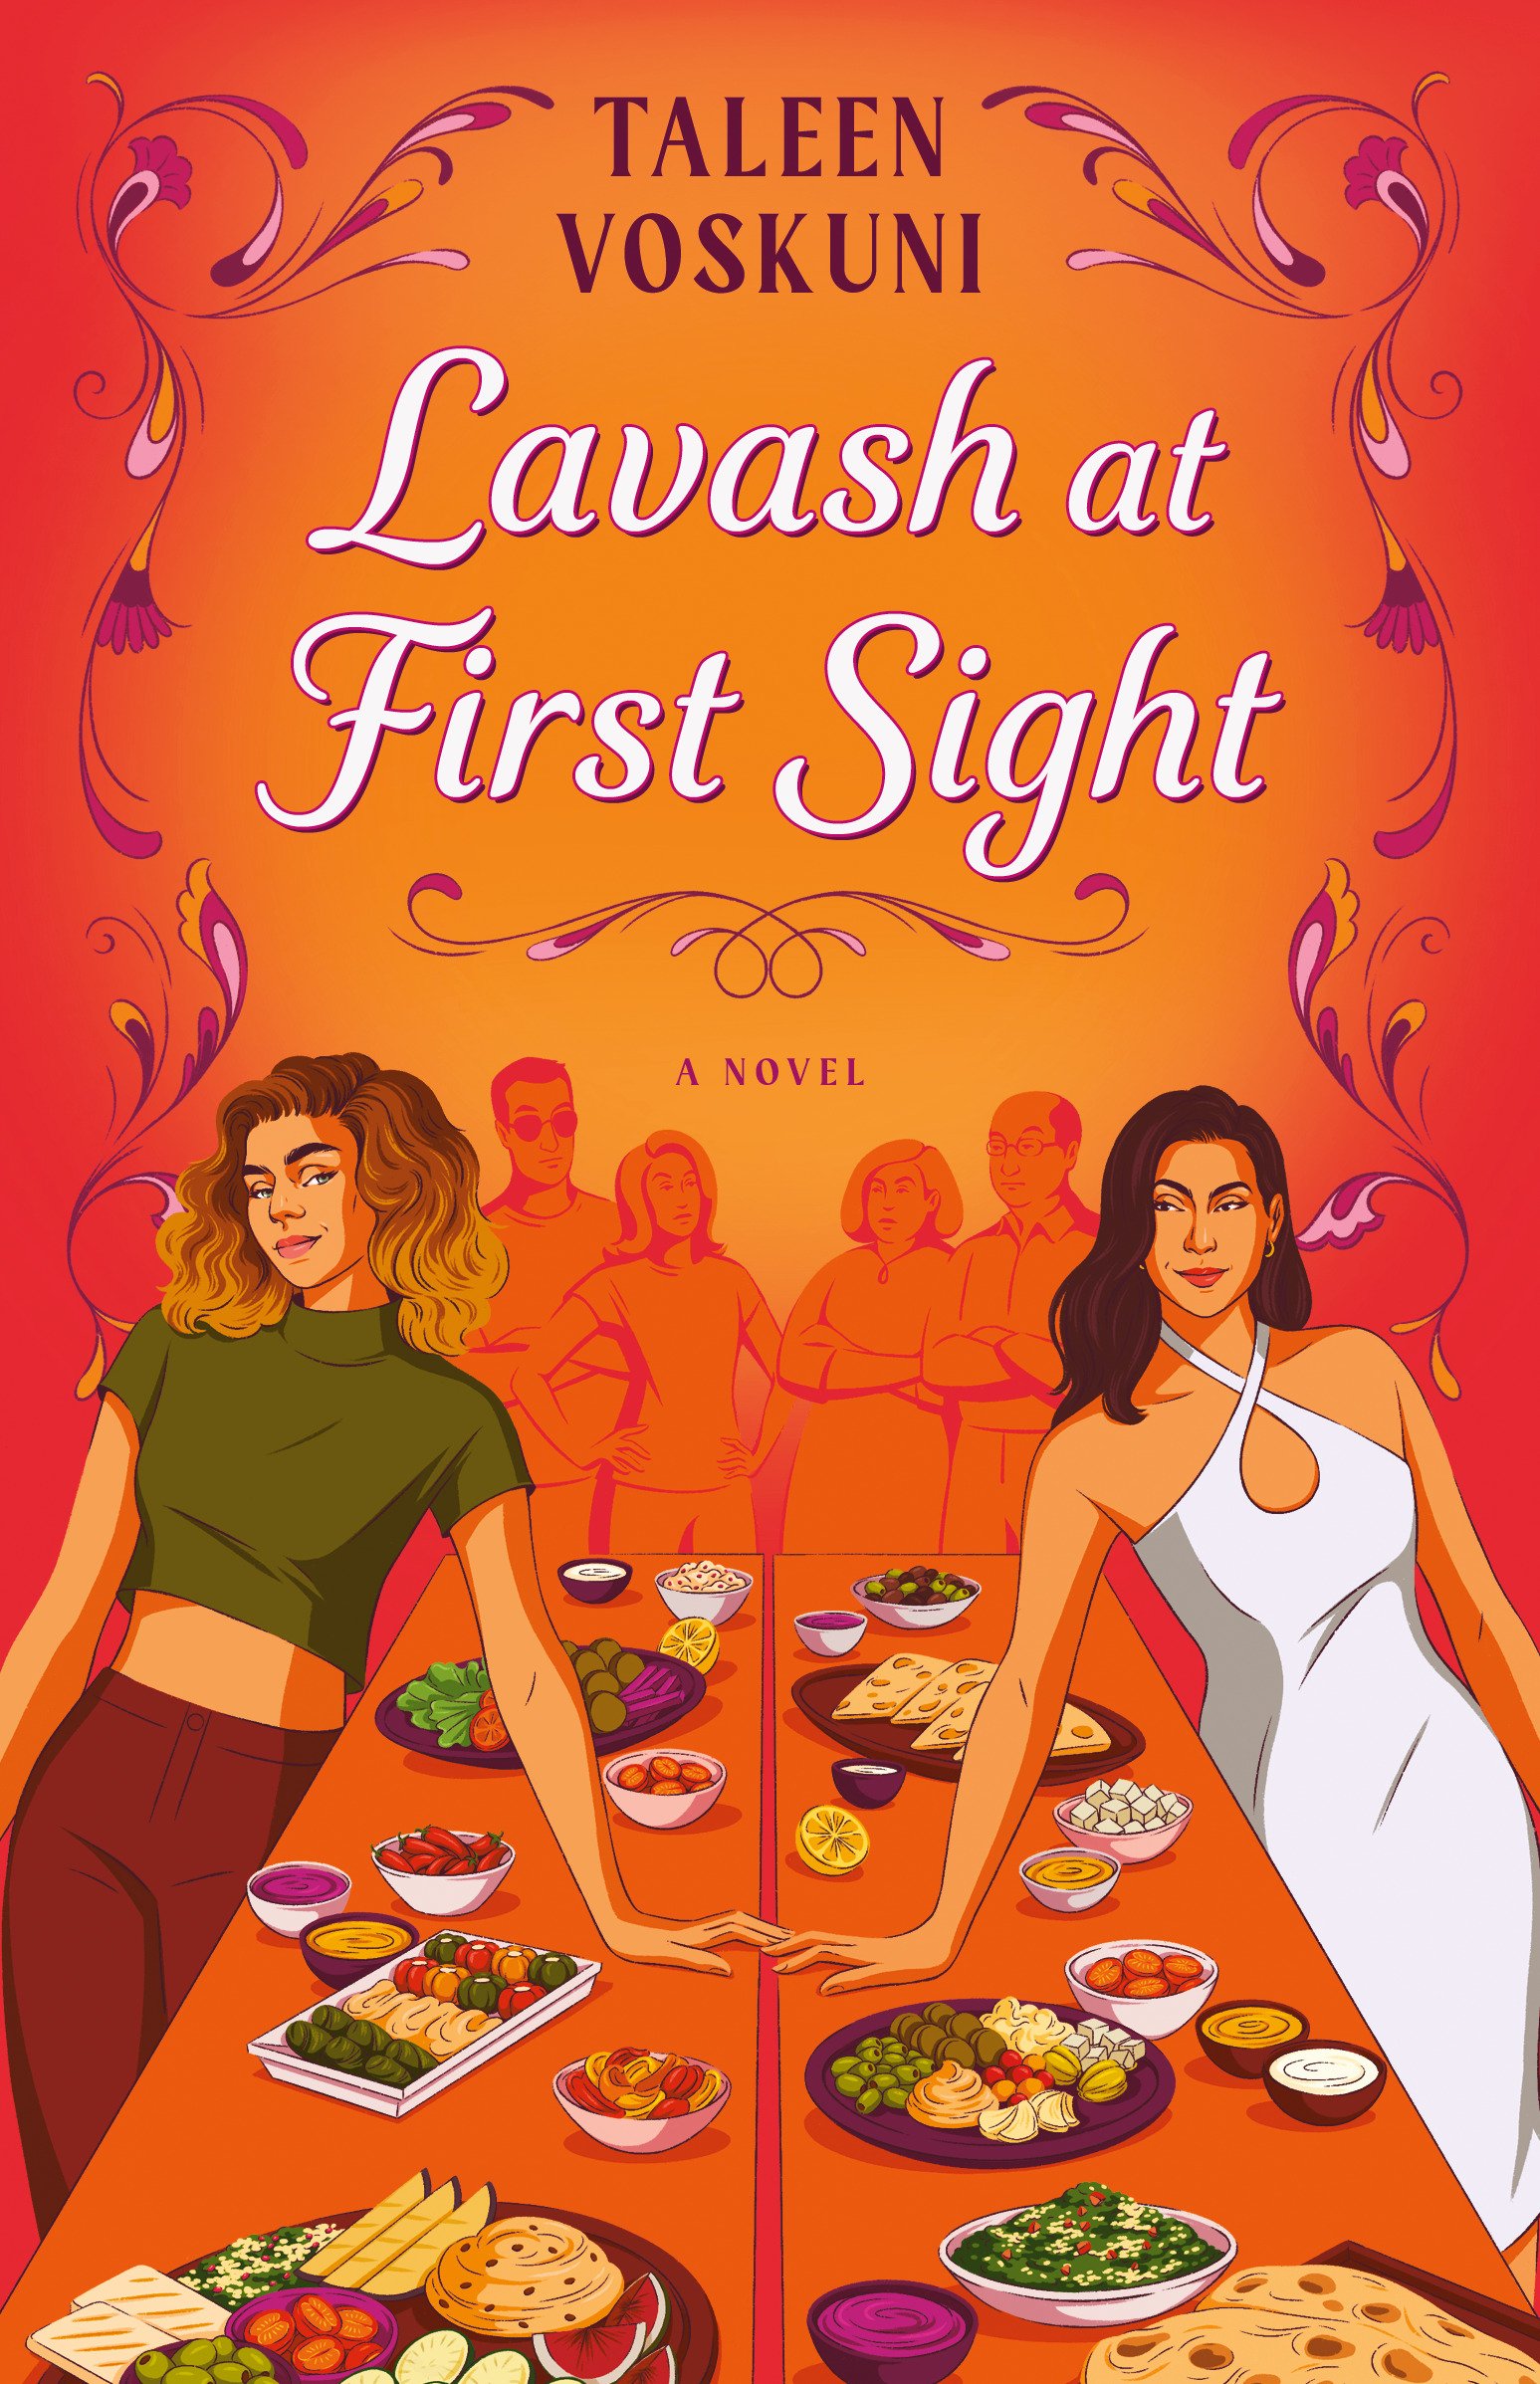 Book review: Lavash at first sight